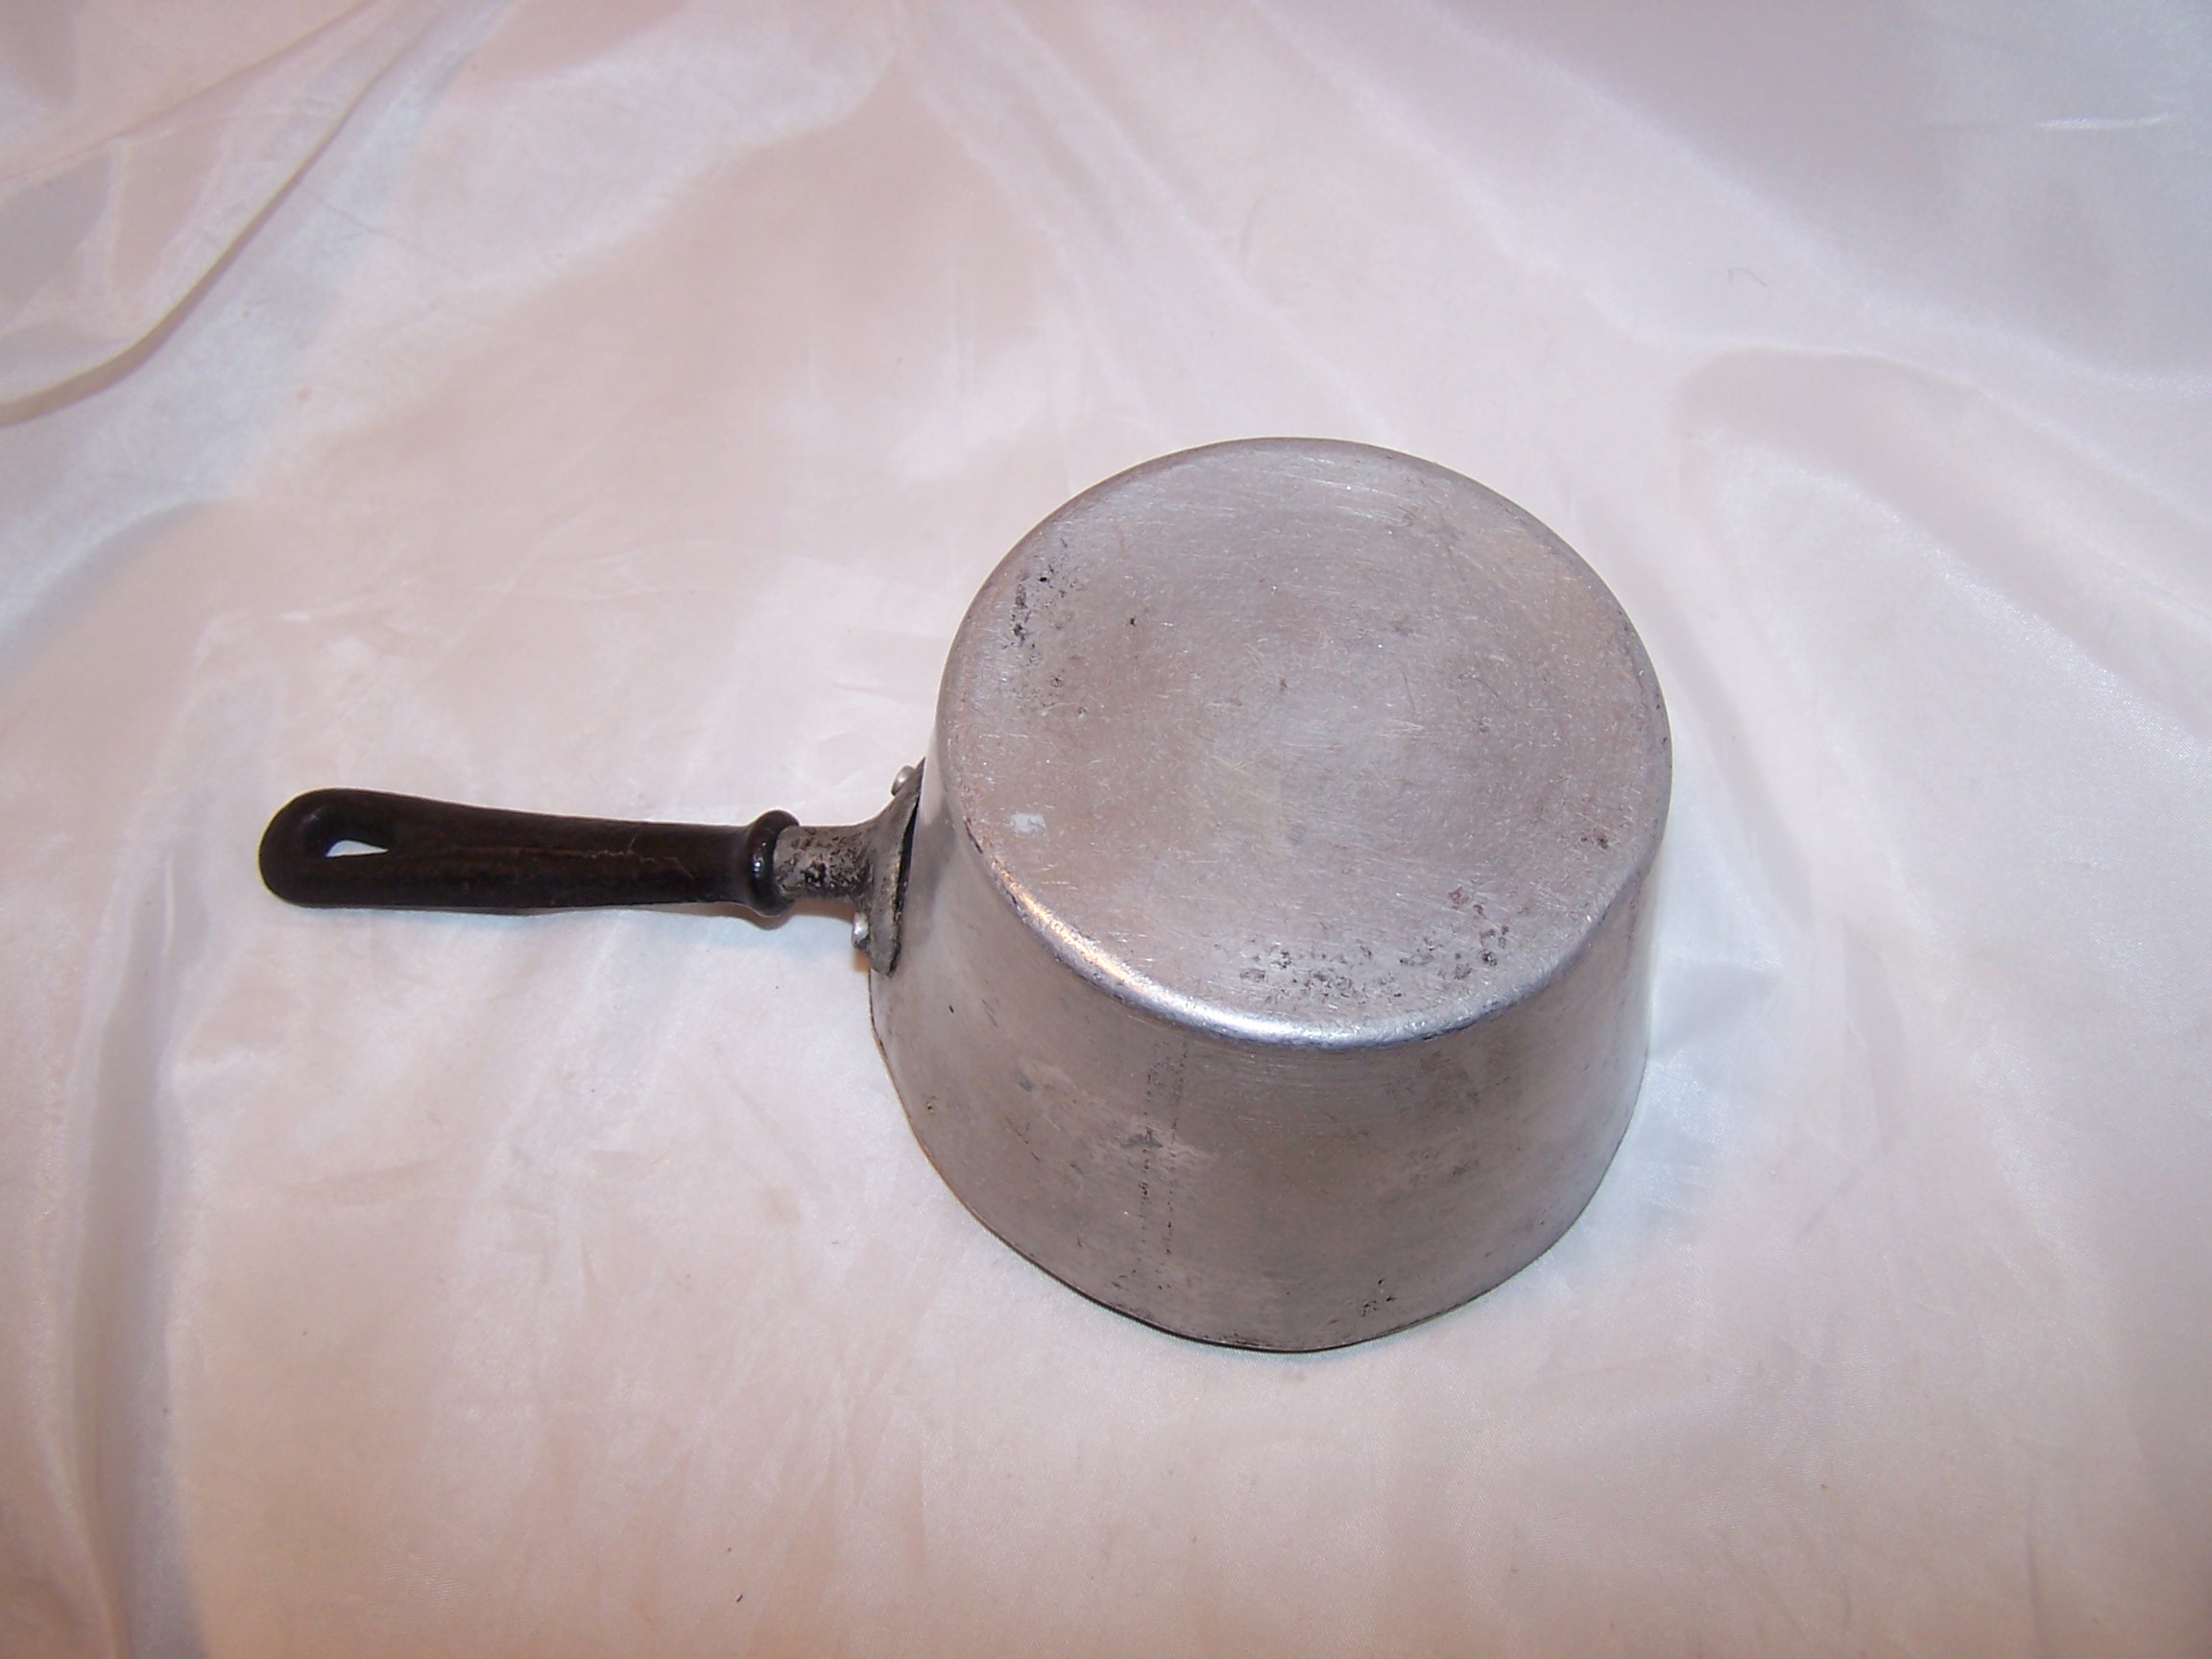 Image 5 of Toy Cook Pot, Aluminum, Vintage Childs Toy